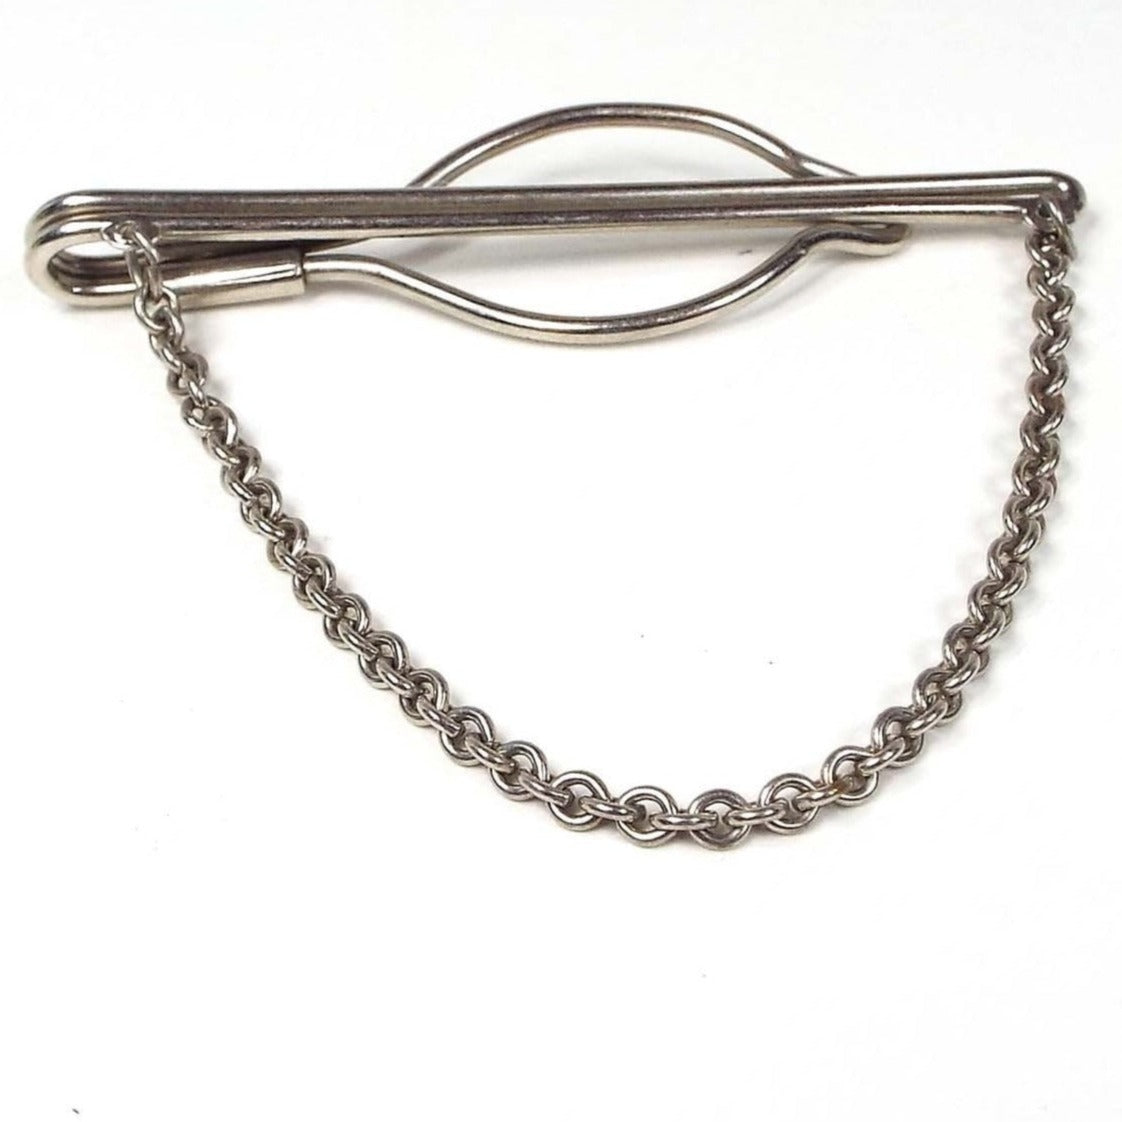 Front view of the 1940's Mid Century vintage tie bar chain. The metal is silver tone in color. The bar part is two rounded wires together on the front and curves around to the back where there is an open oval area. The tie slides between the two bar areas. Rolo chain hangs down from each side of the tie bar.